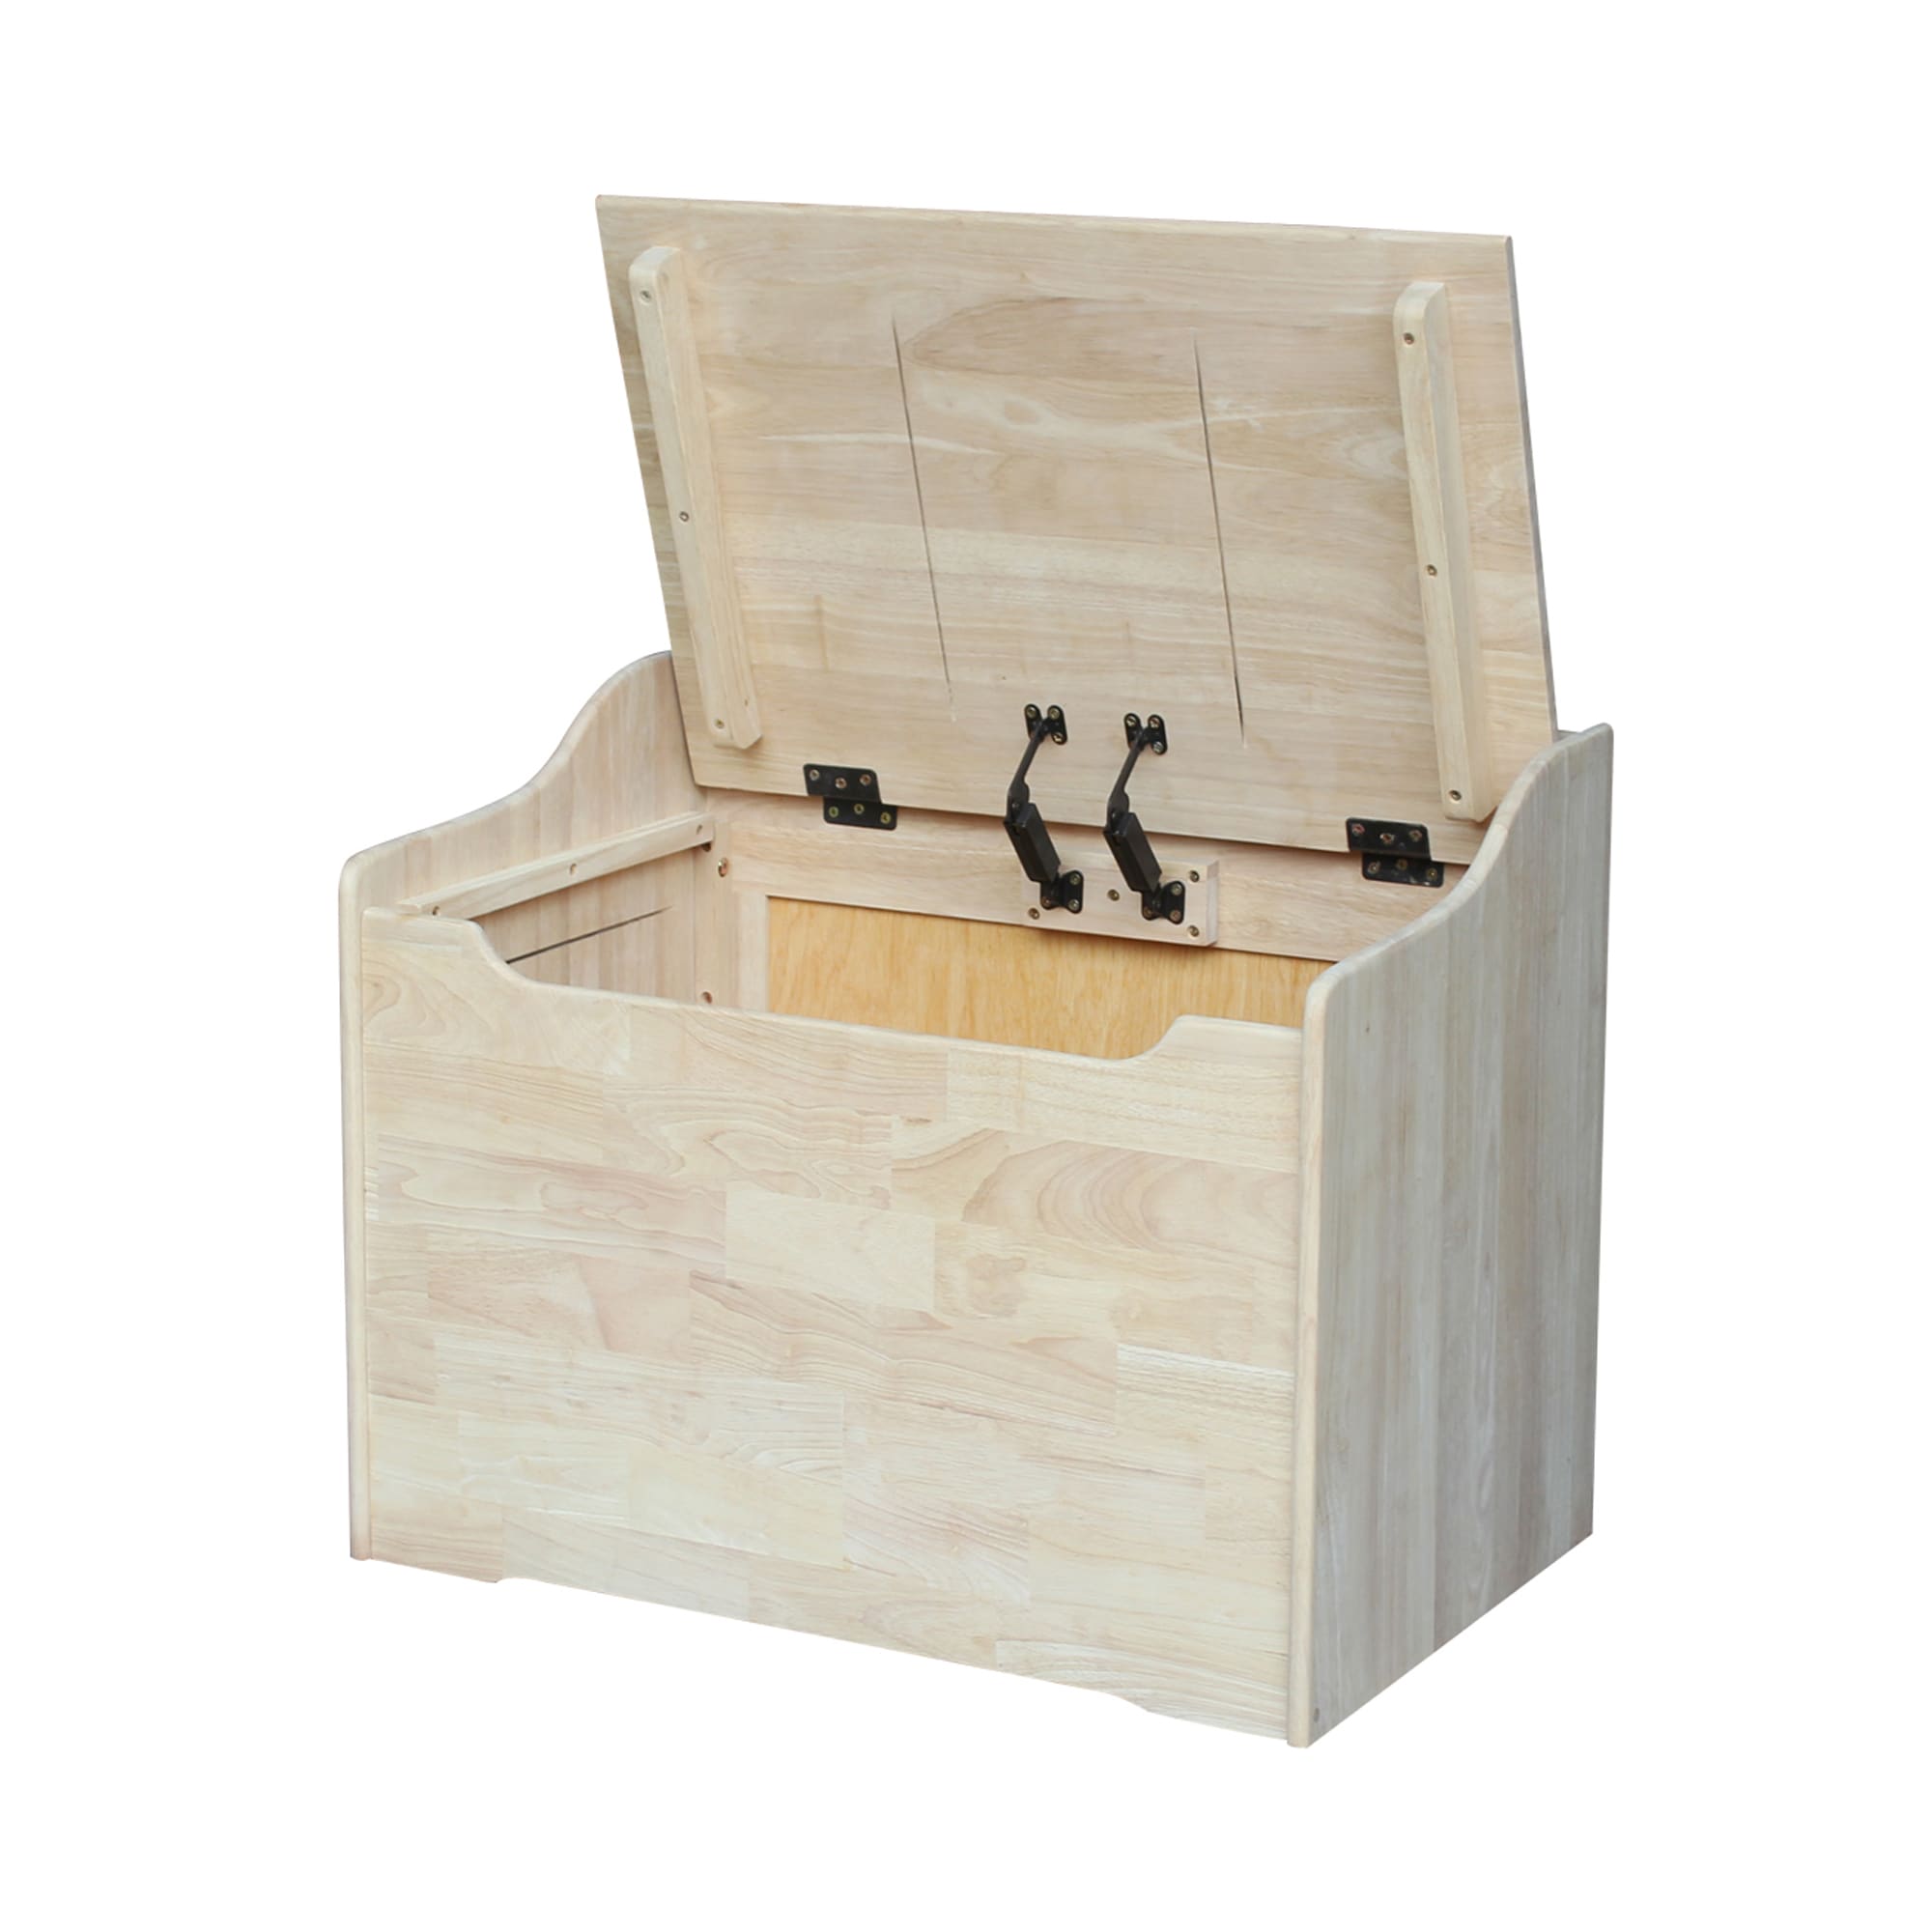 Unfinished Wooden Deck Box with Hinges & Latches - card storage